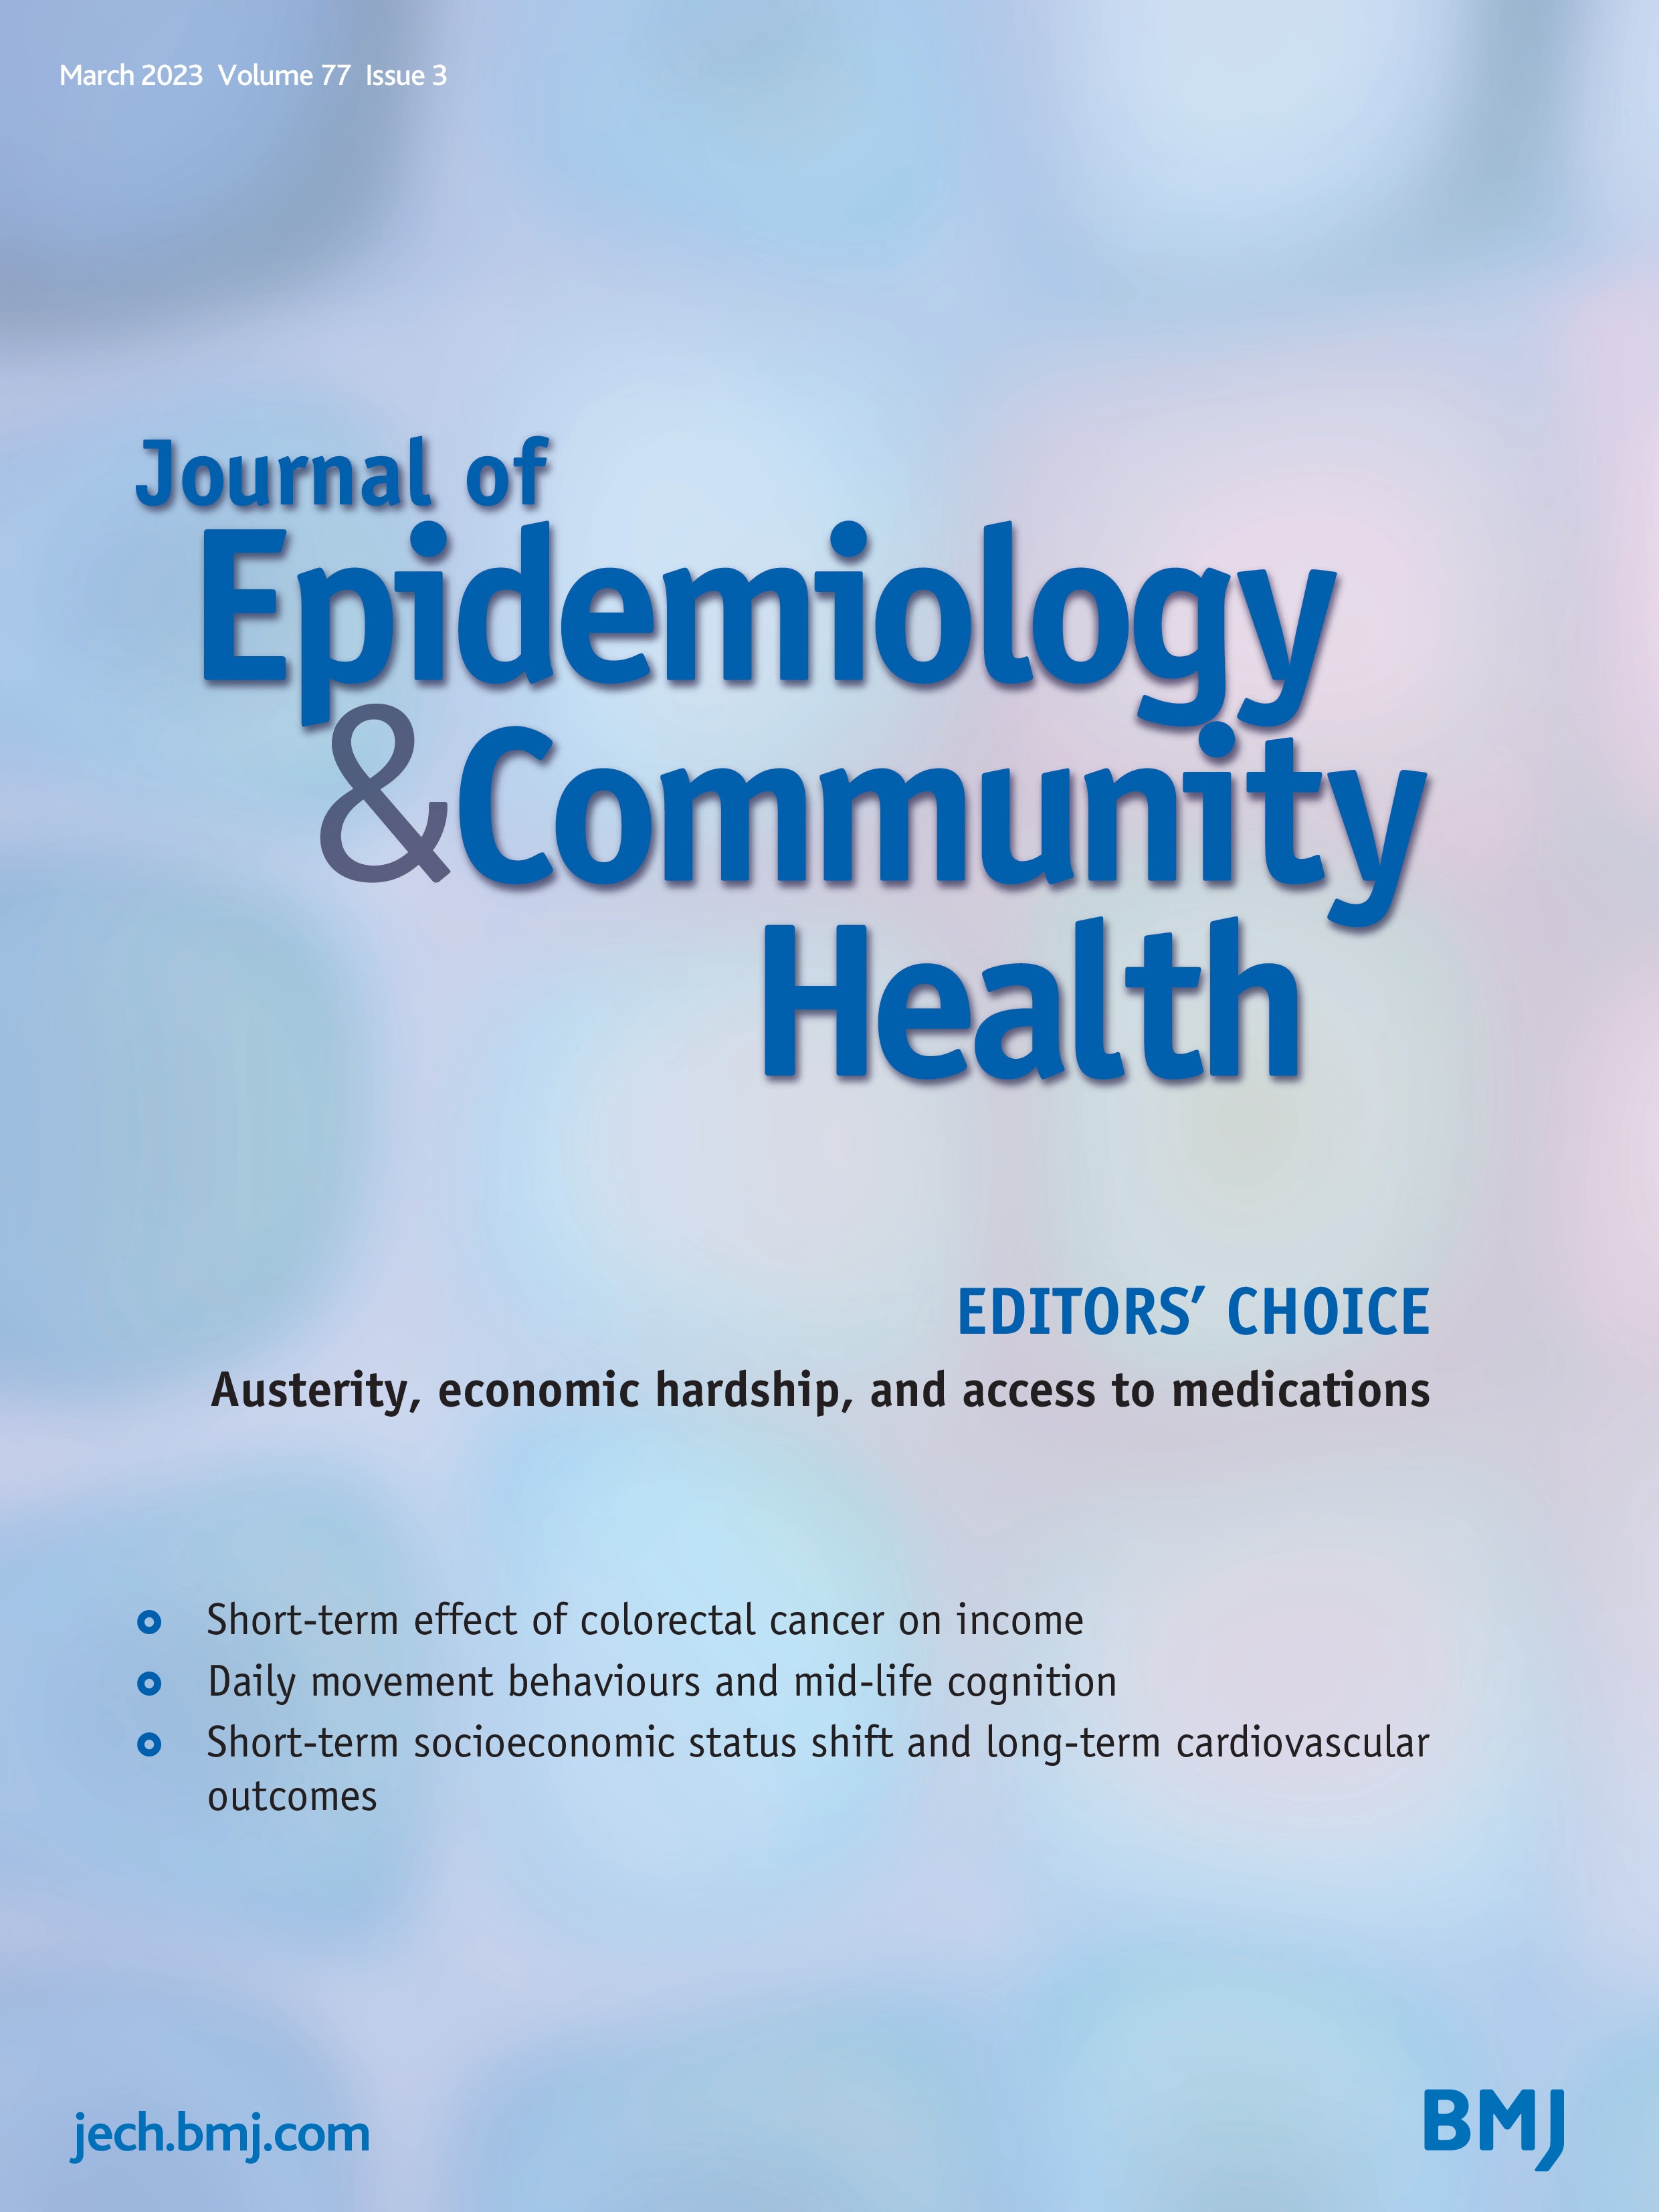 Testing and refining middle-range theory in evaluations of public-health interventions: evidence from recent systematic reviews and trials